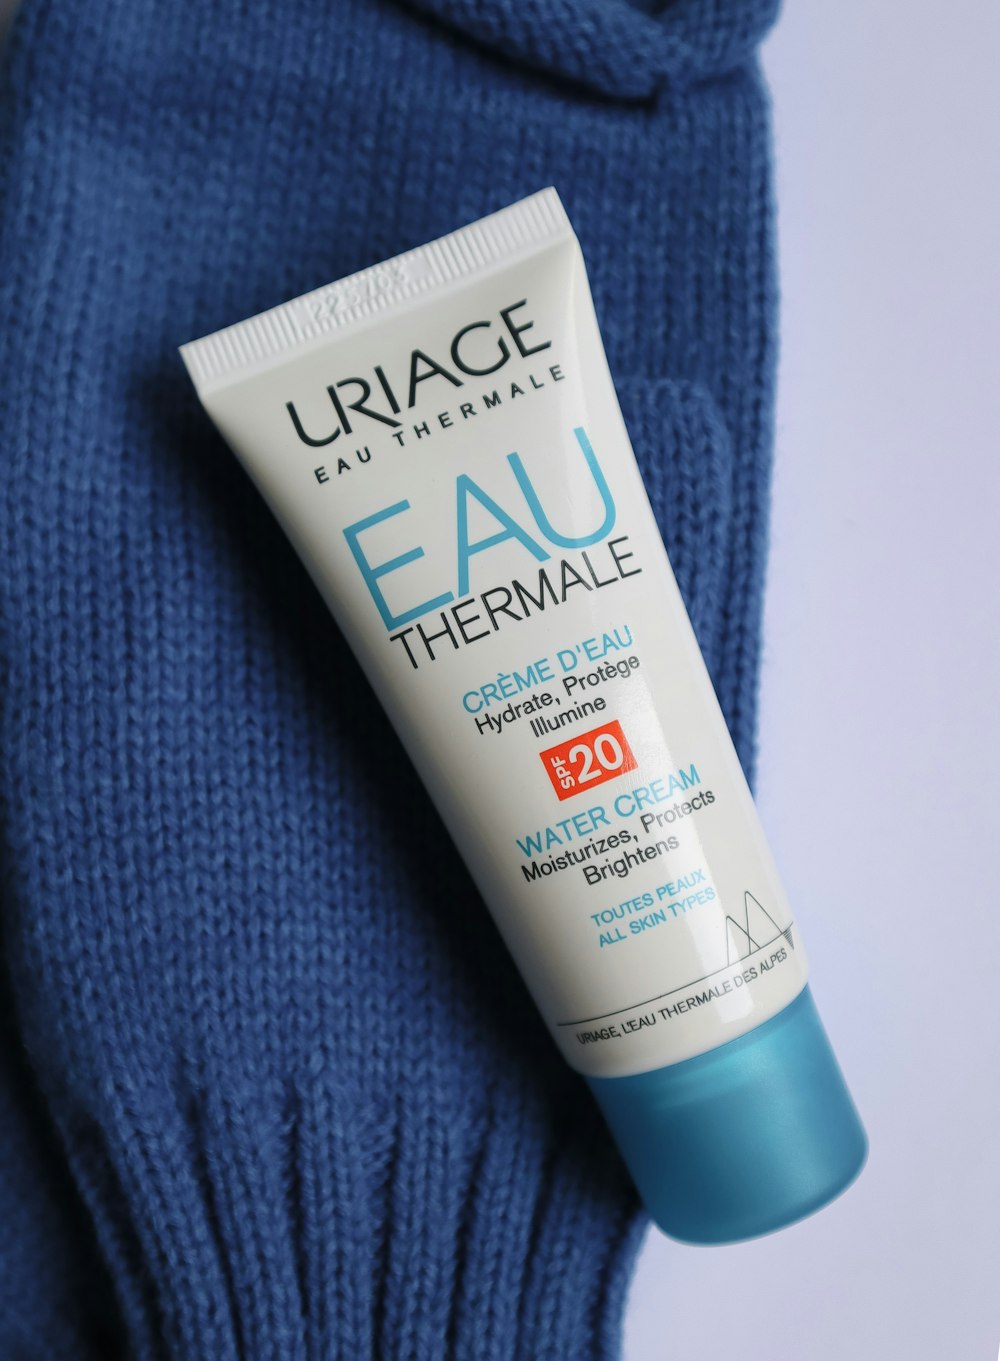 a tube of sunscreen on a blue sweater